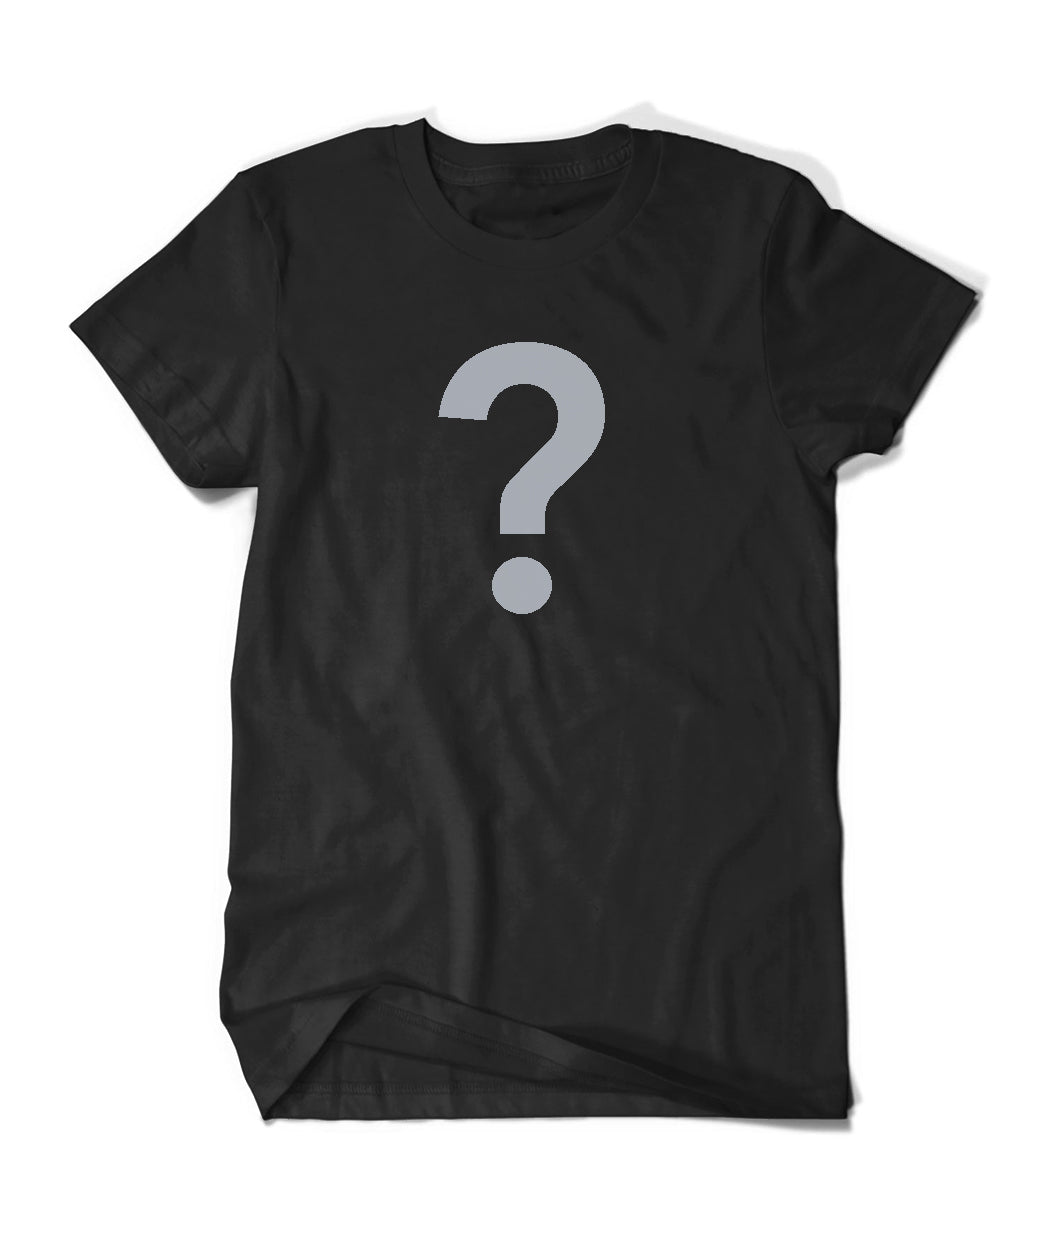 A black t-shirt with a large grey question mark - by Charles Trippy